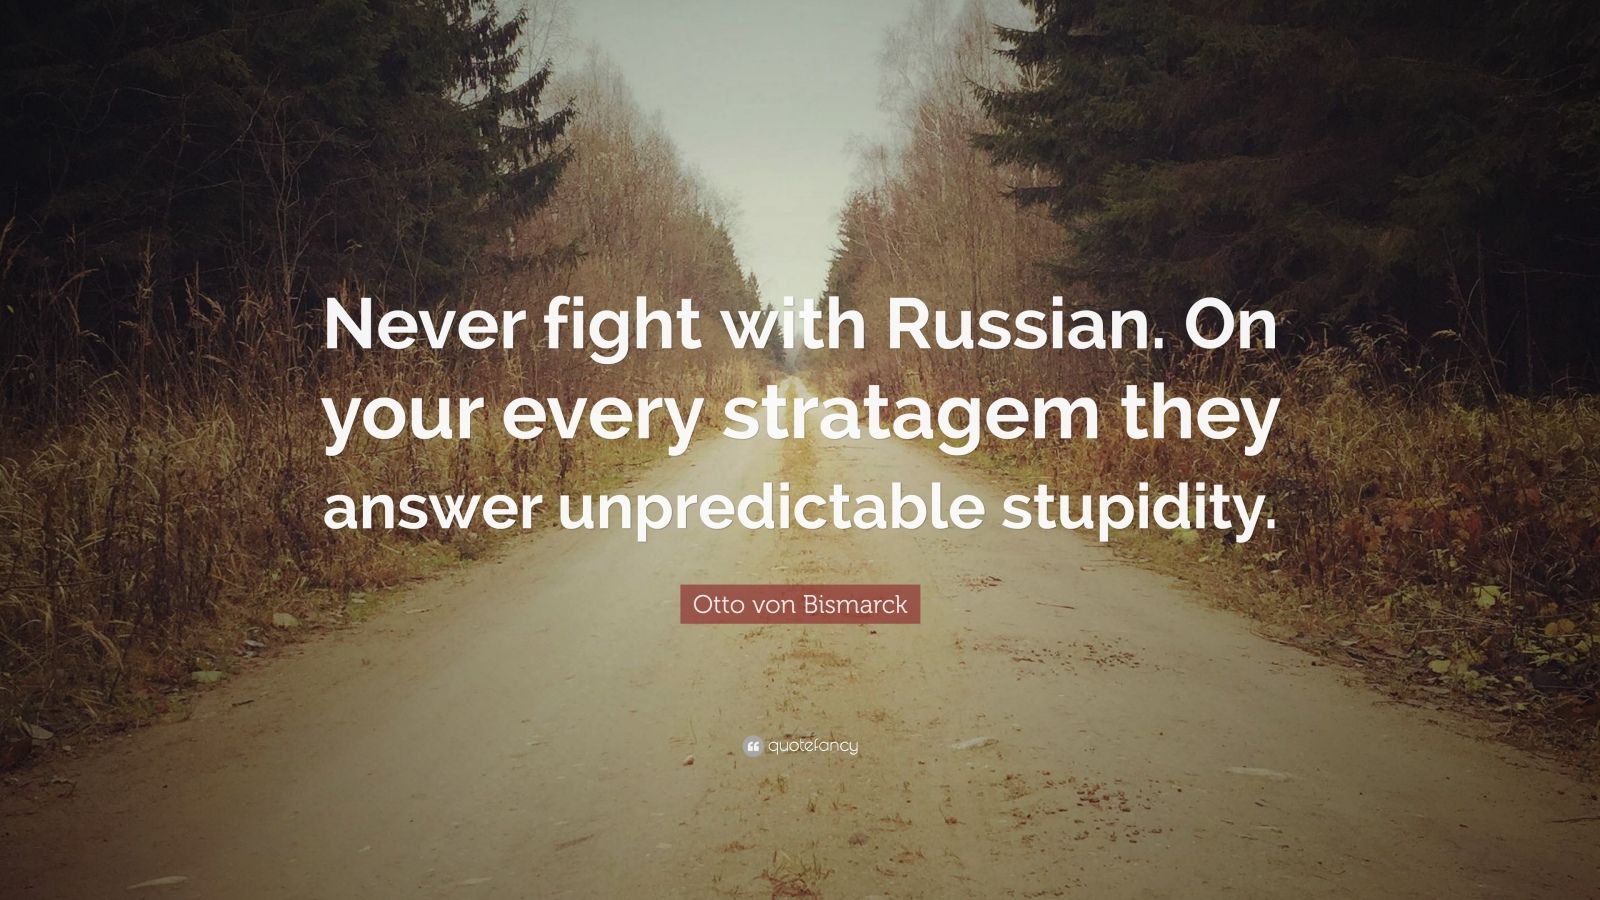 Otto von Bismarck Quote: “Never fight with Russian. On your every